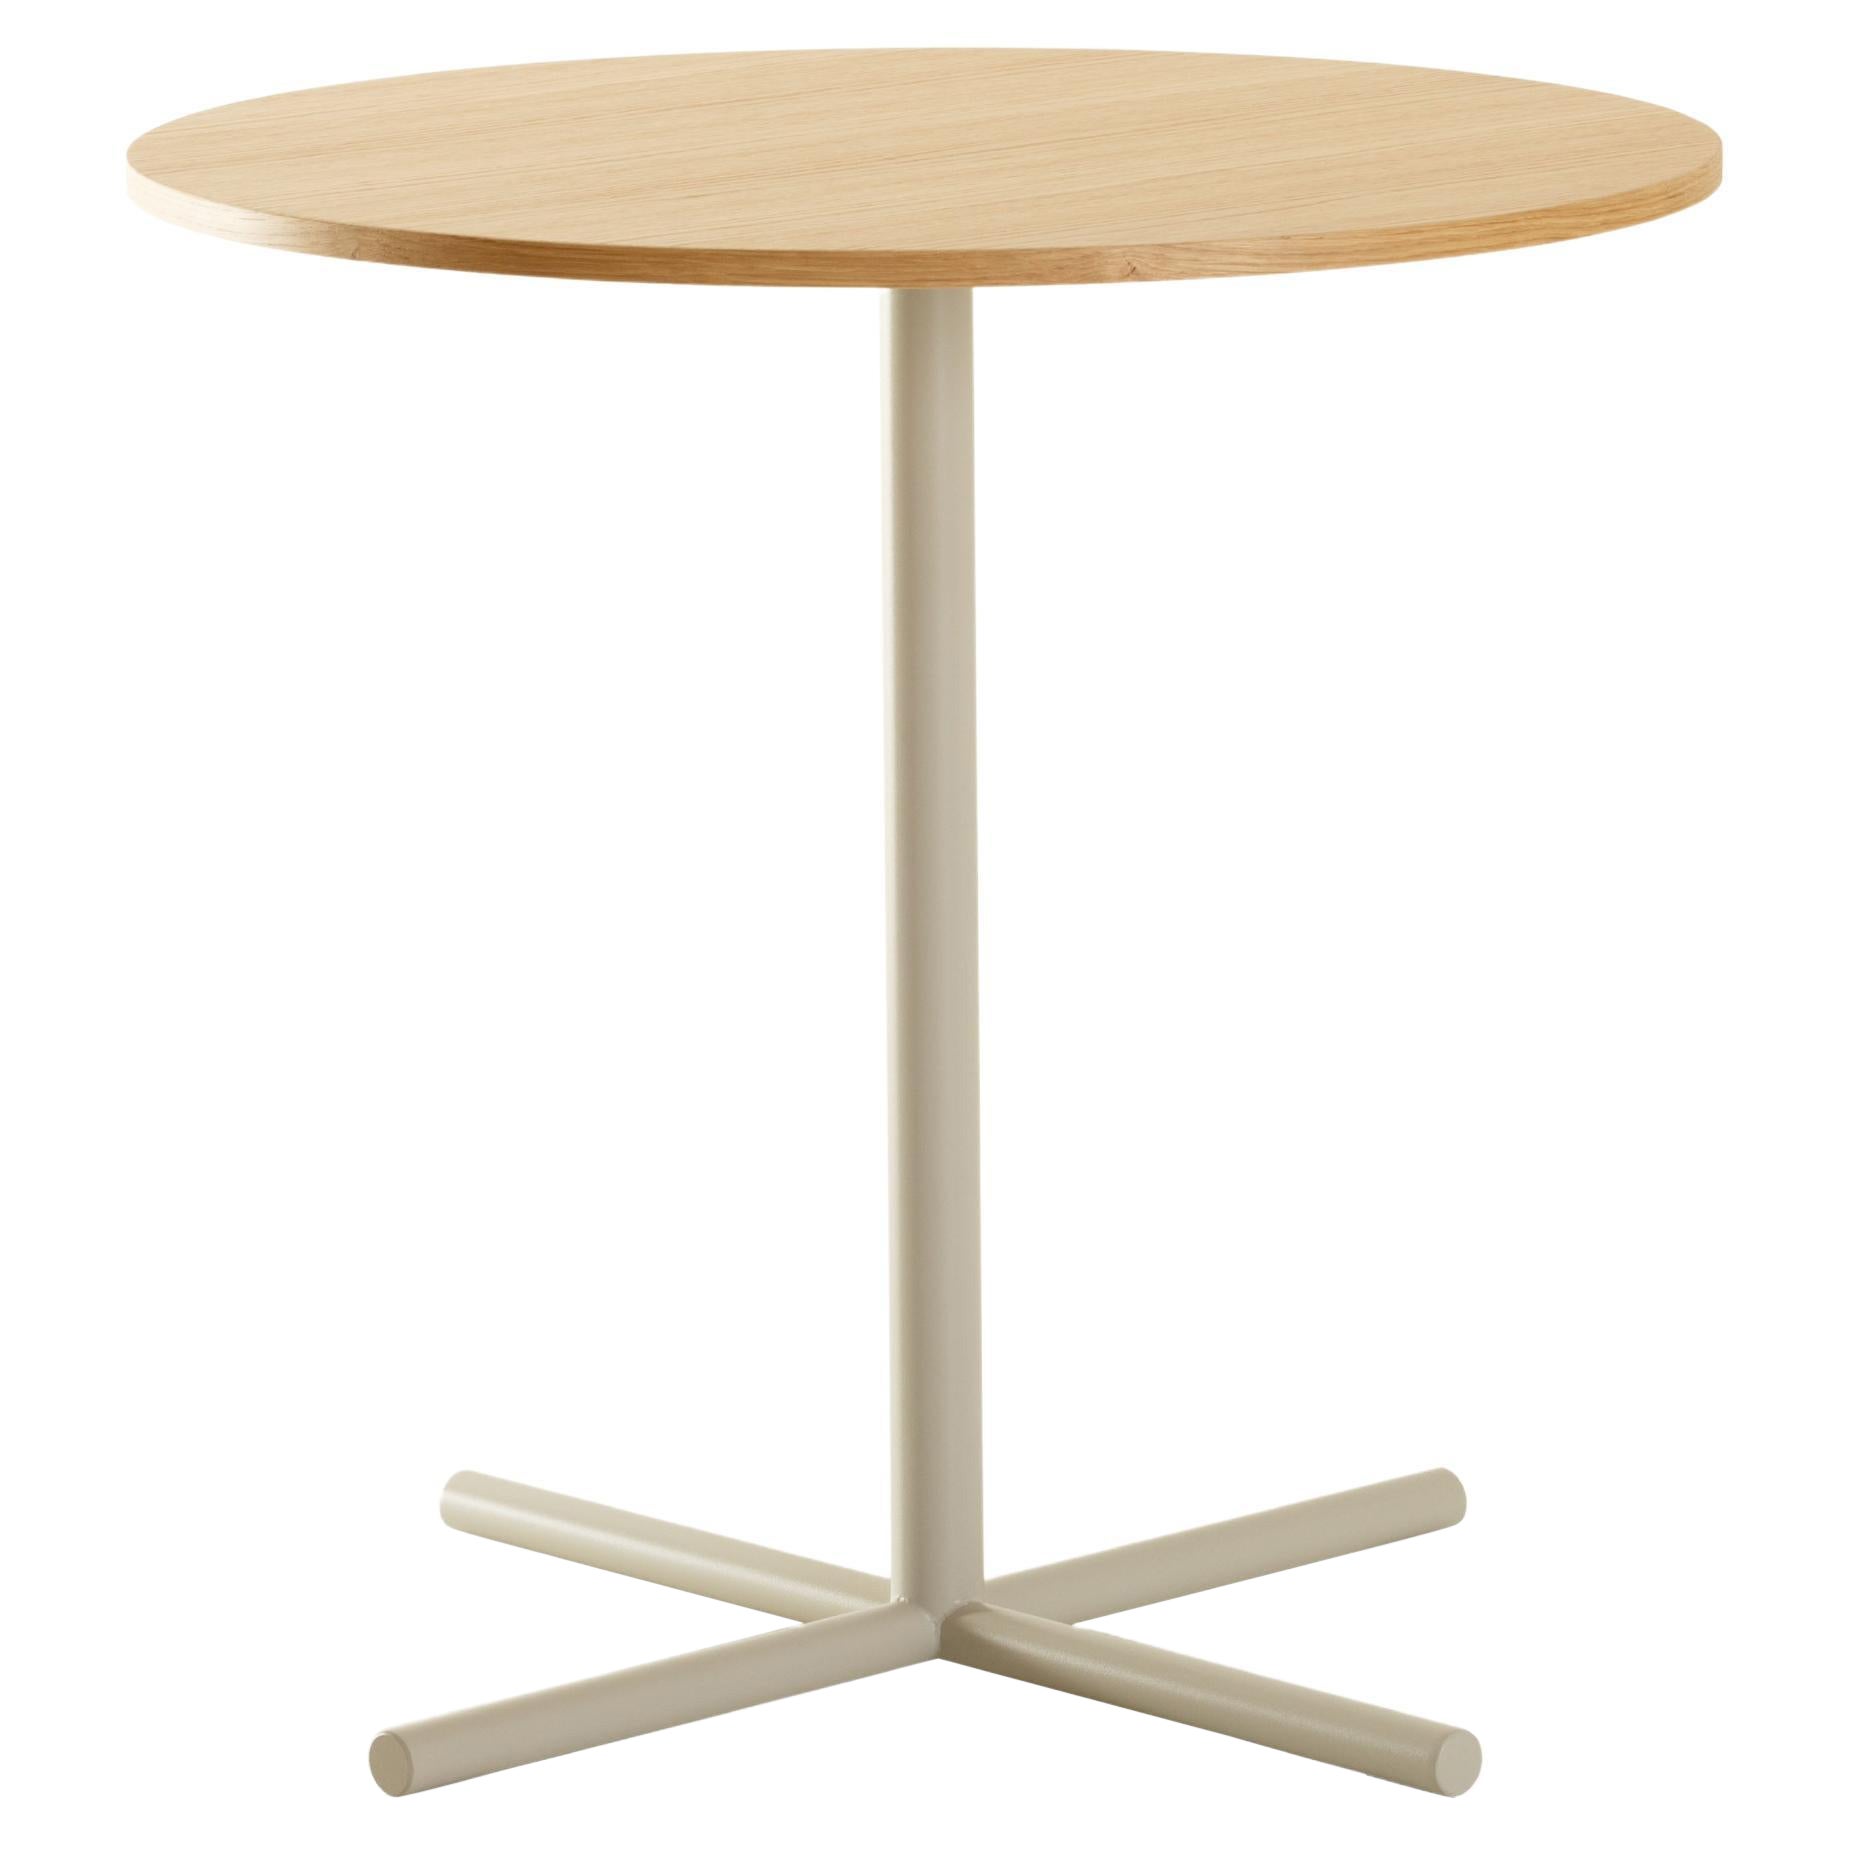 21st Century Modern round oakwood Table Notable Made in Italy For Sale